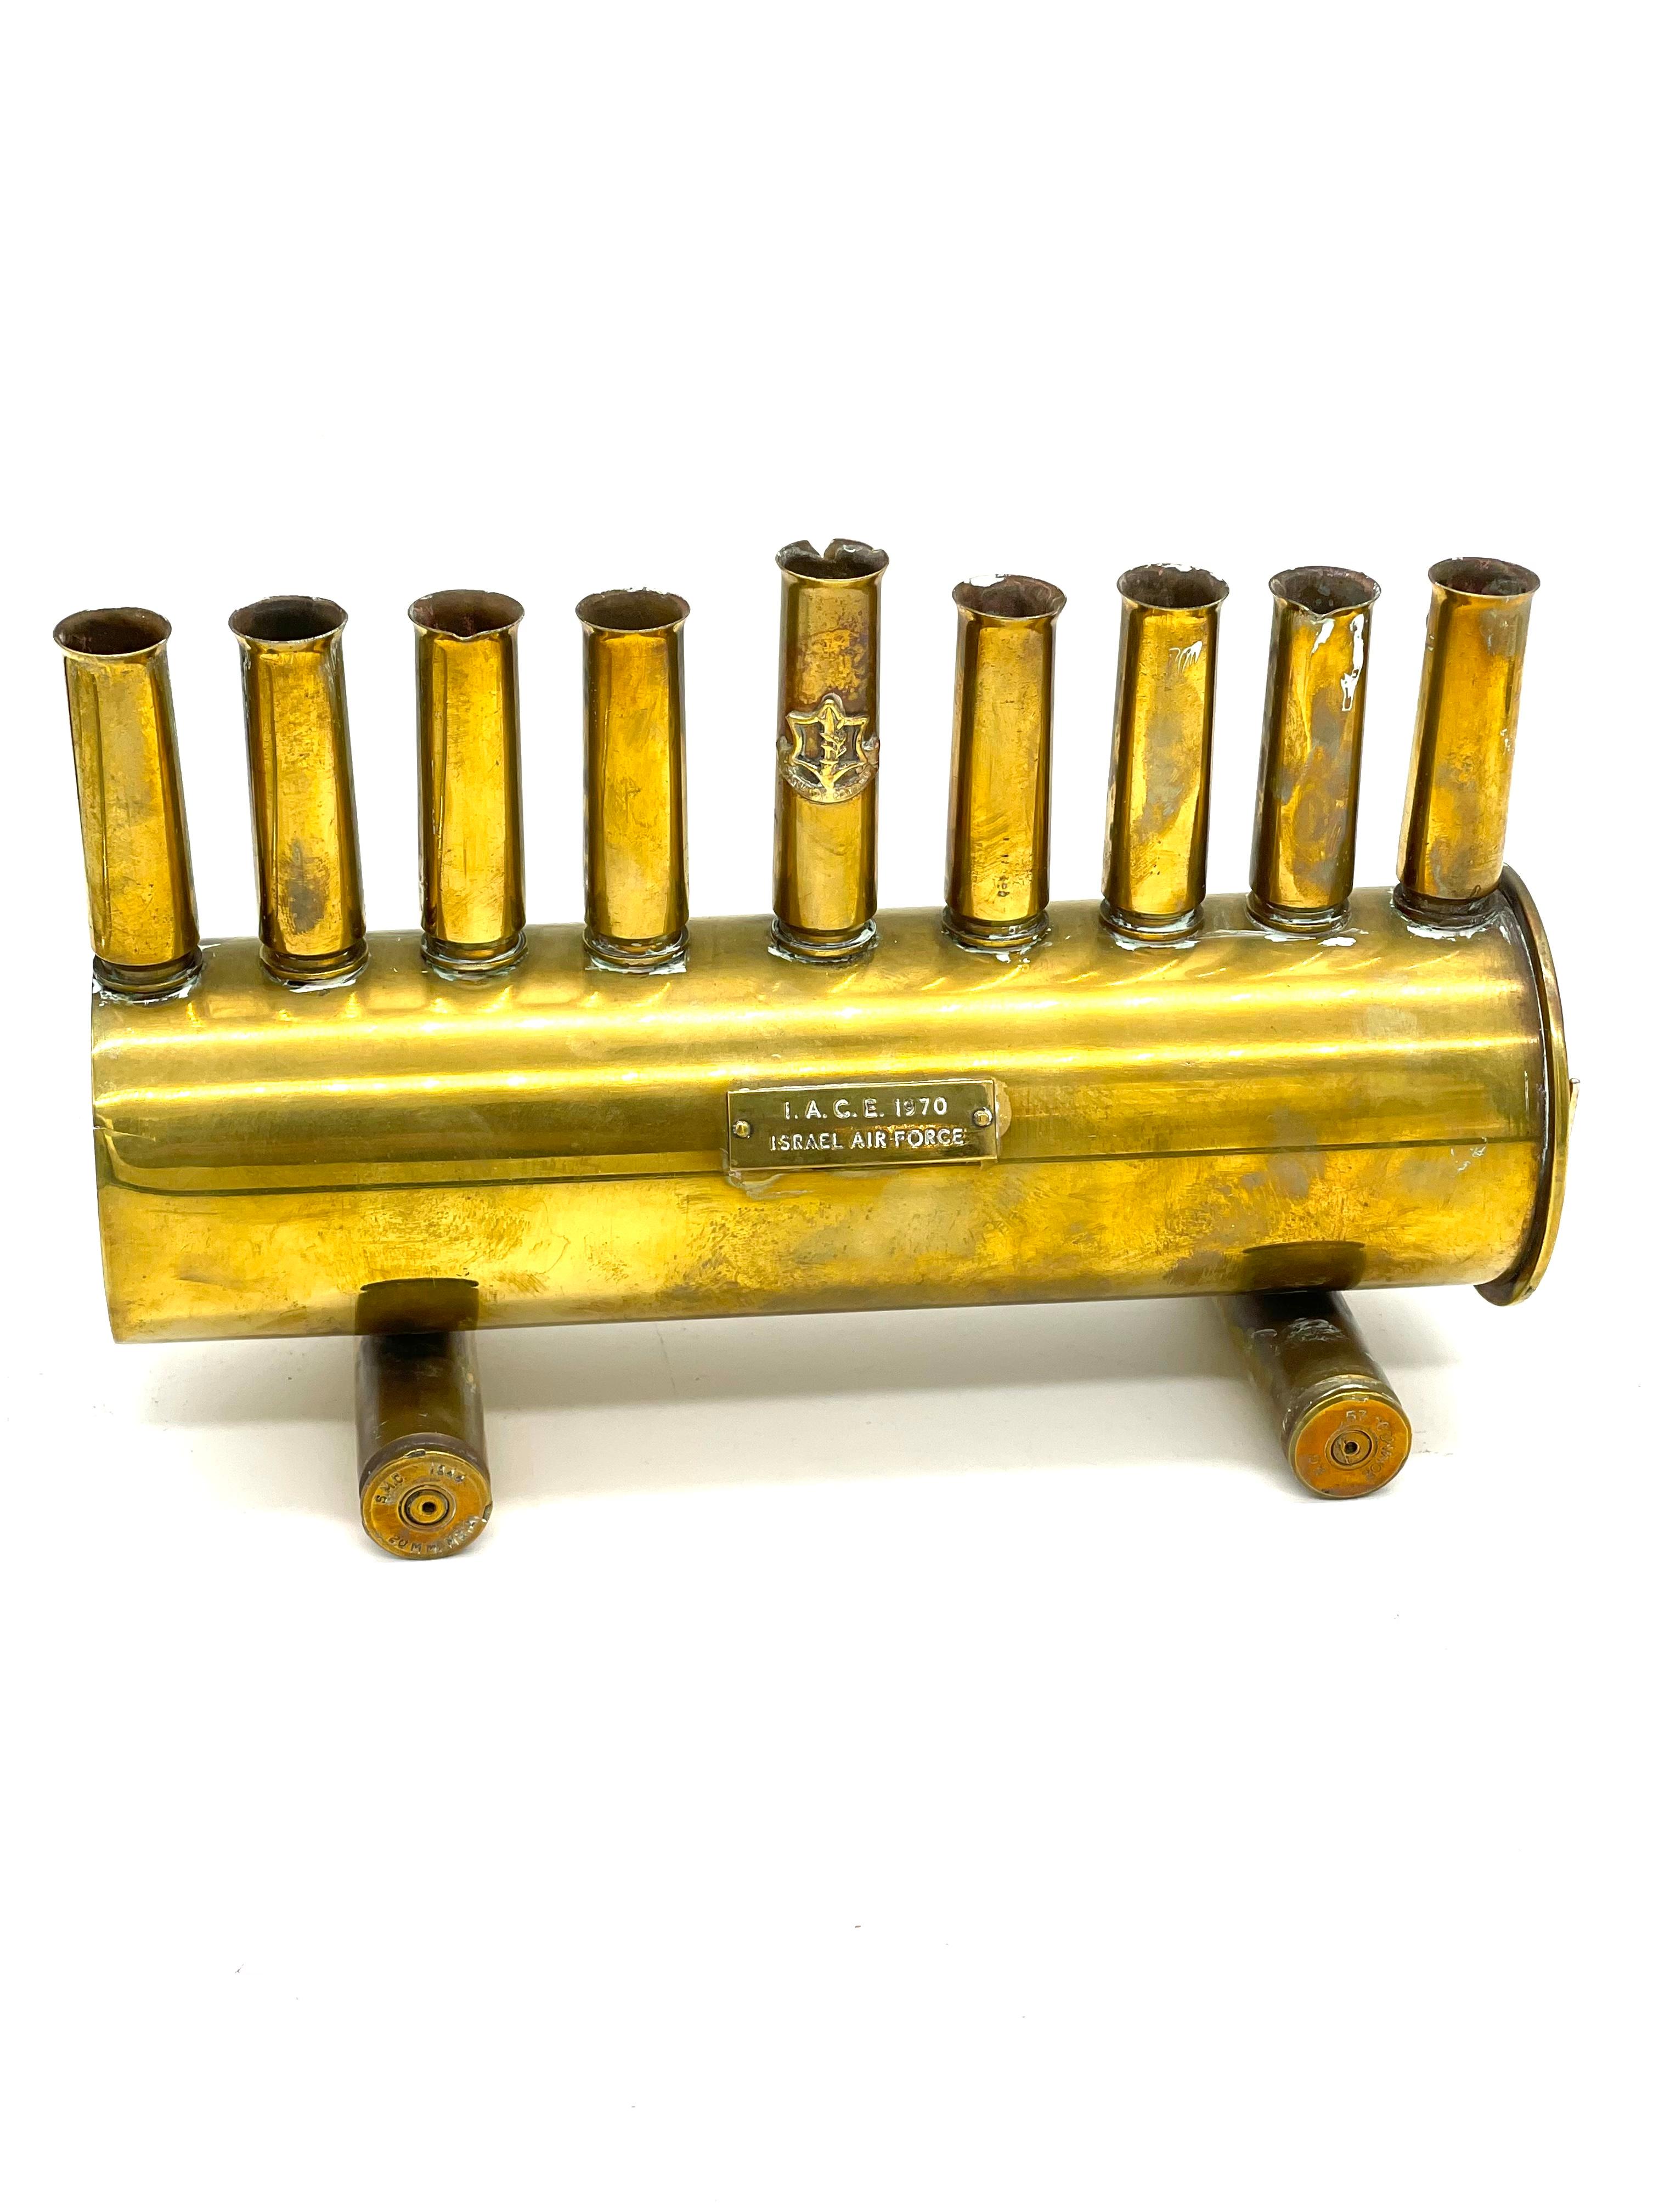 A brass hanukkah lamp made by Israeli Defense soldiers features nine bullet and shell cartridges in the form of candleholders. The bullet cartridges are screwed into a 75-mm shell cartridge, itself supported on two additional bullet cartridges.